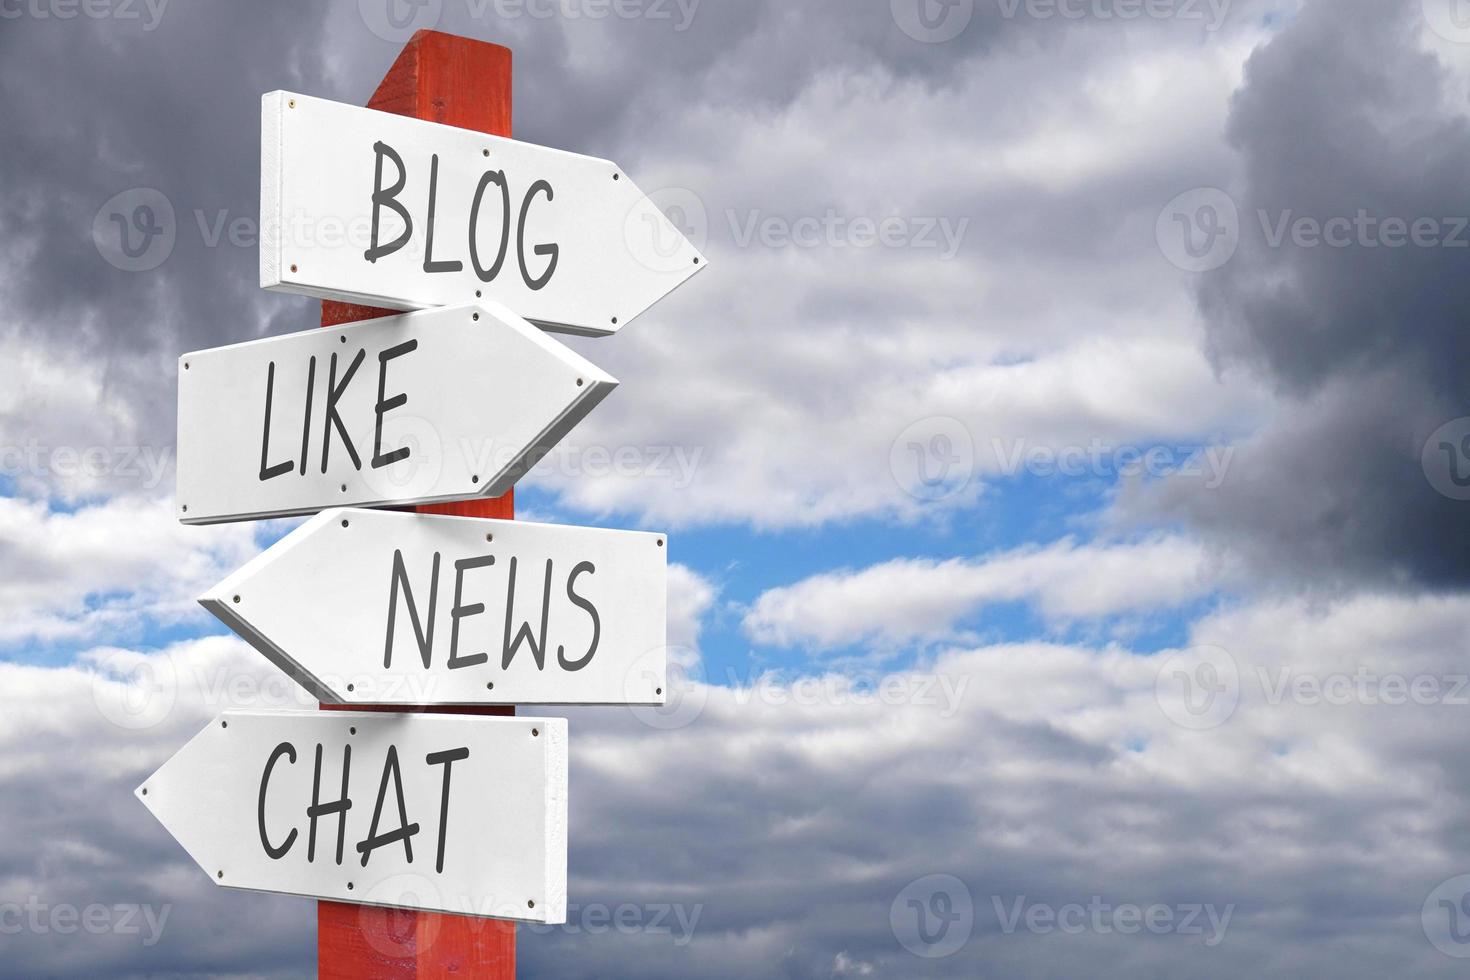 Blog, Like, News, Chat - Wooden Signpost with Four Arrows photo